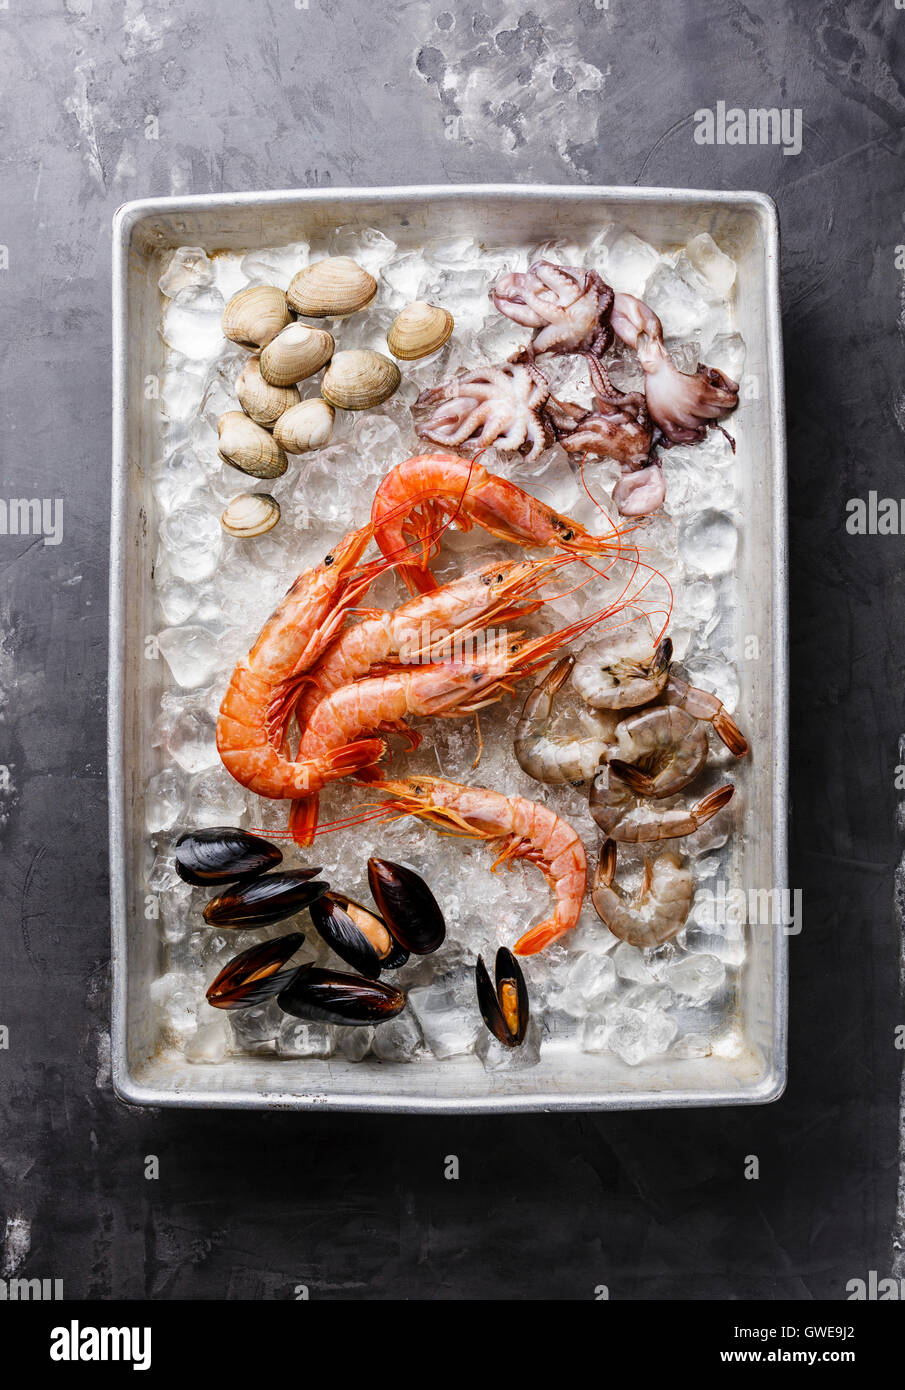 Raw fresh Seafood Cocktail with Mussels, Clams, Vongole, Prawns and Shrimps in metal tray on ice Stock Photo